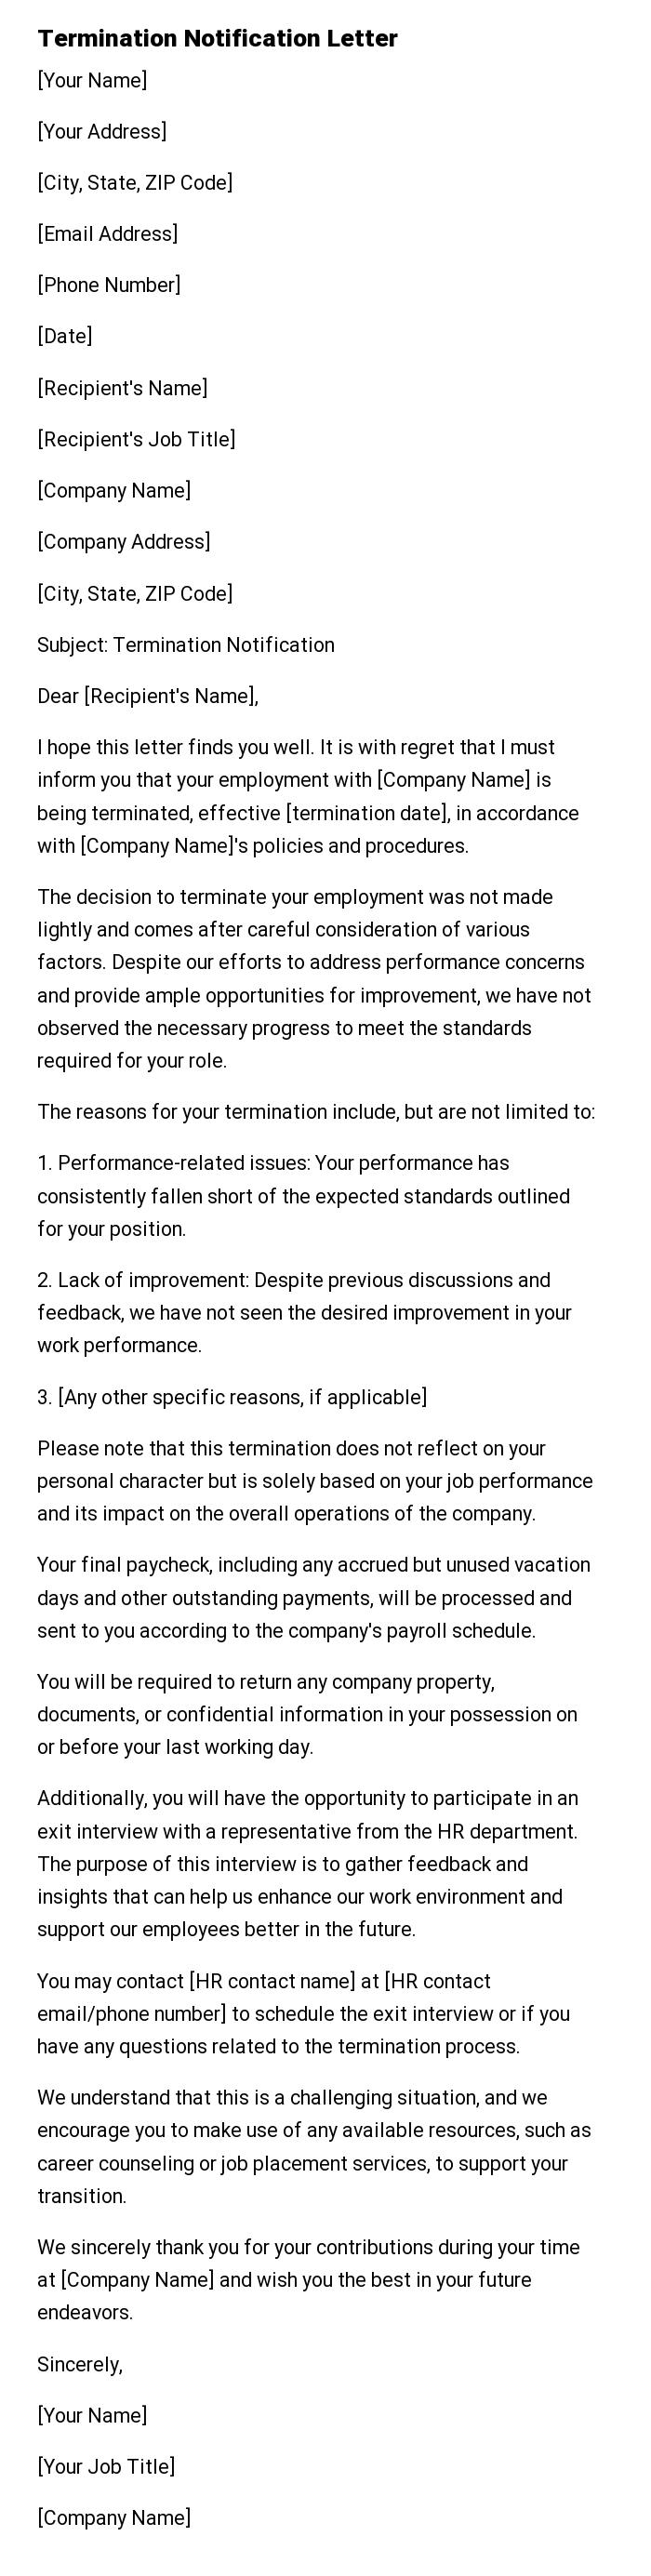 Termination Notification Letter